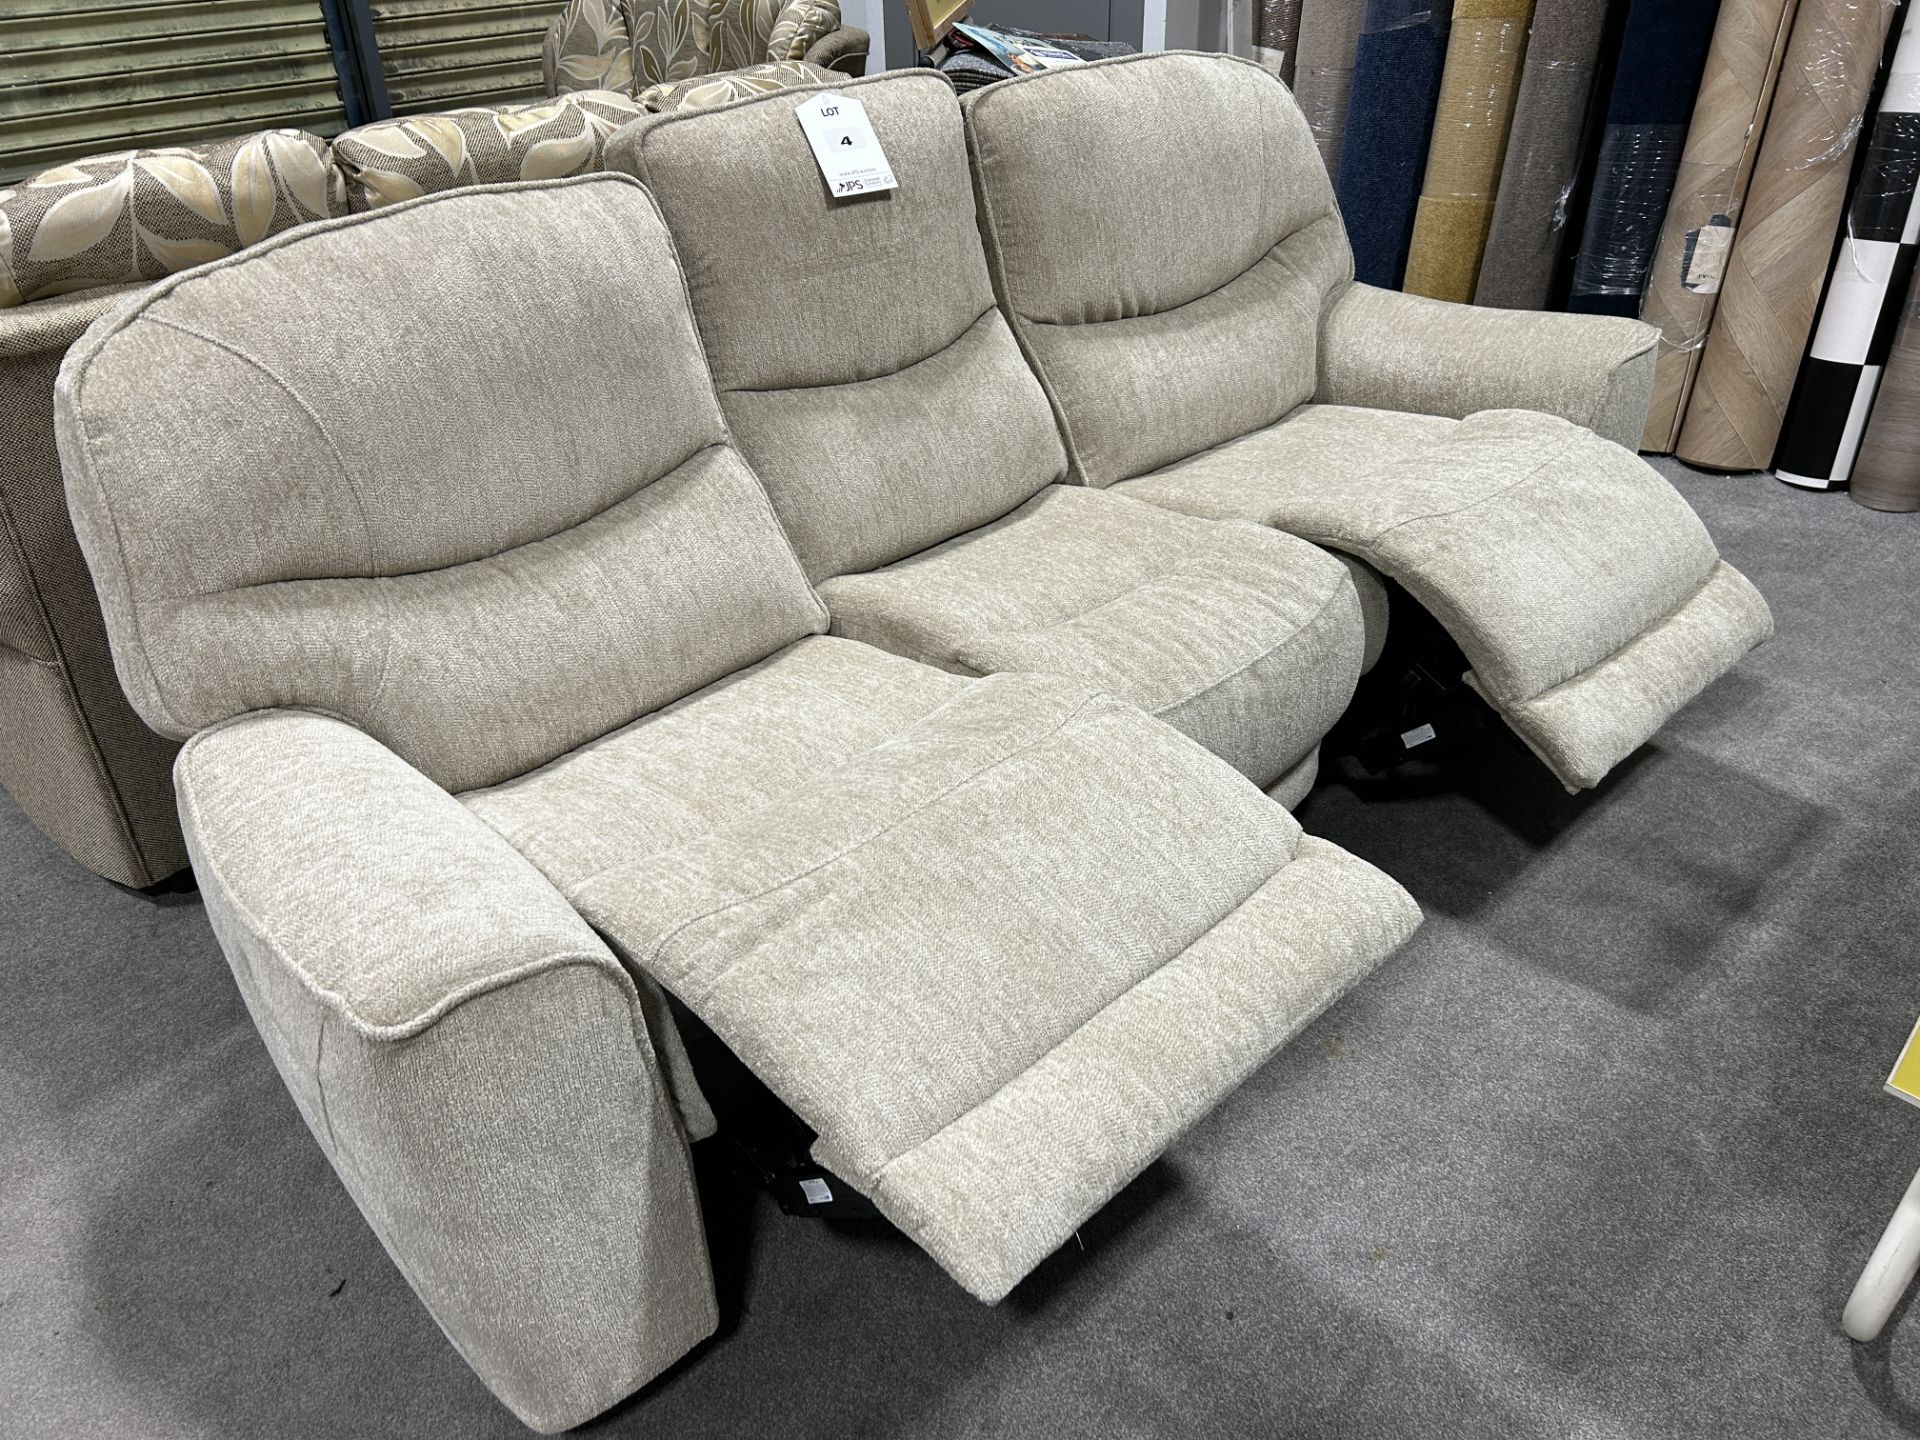 Ex-Display Sweet Dreams Greenwich 3 Seater Recliner Sofa | RRP £799 - Image 2 of 2